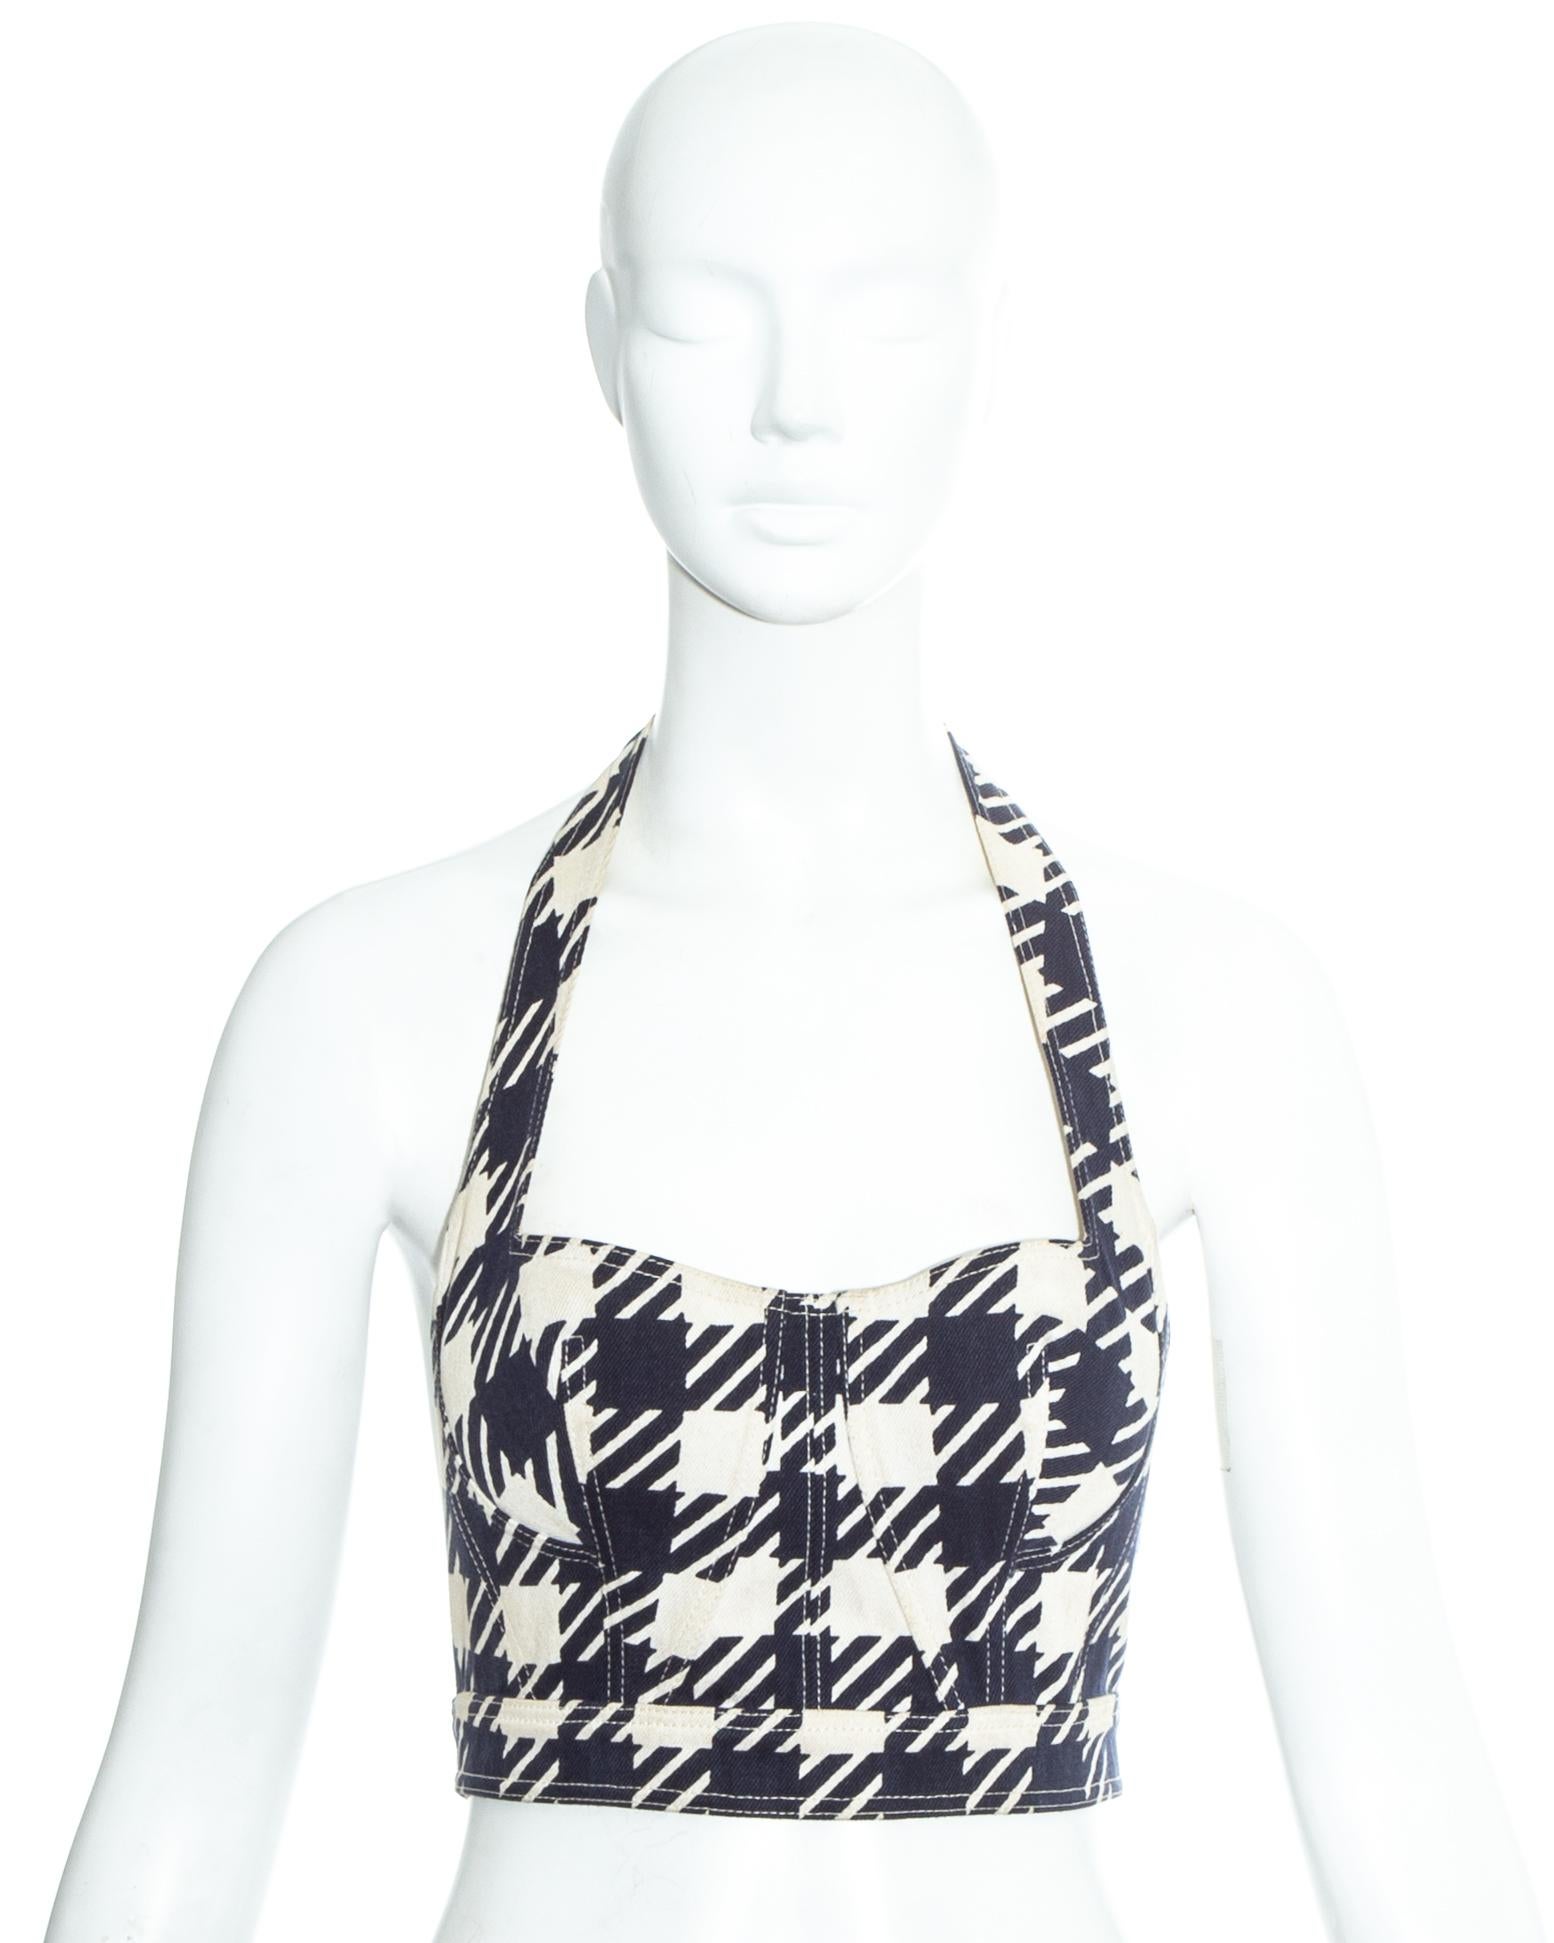 Azzedine Alaia navy blue houndstooth 'Tati' corset with built in bra.

Spring-Summer 1991
